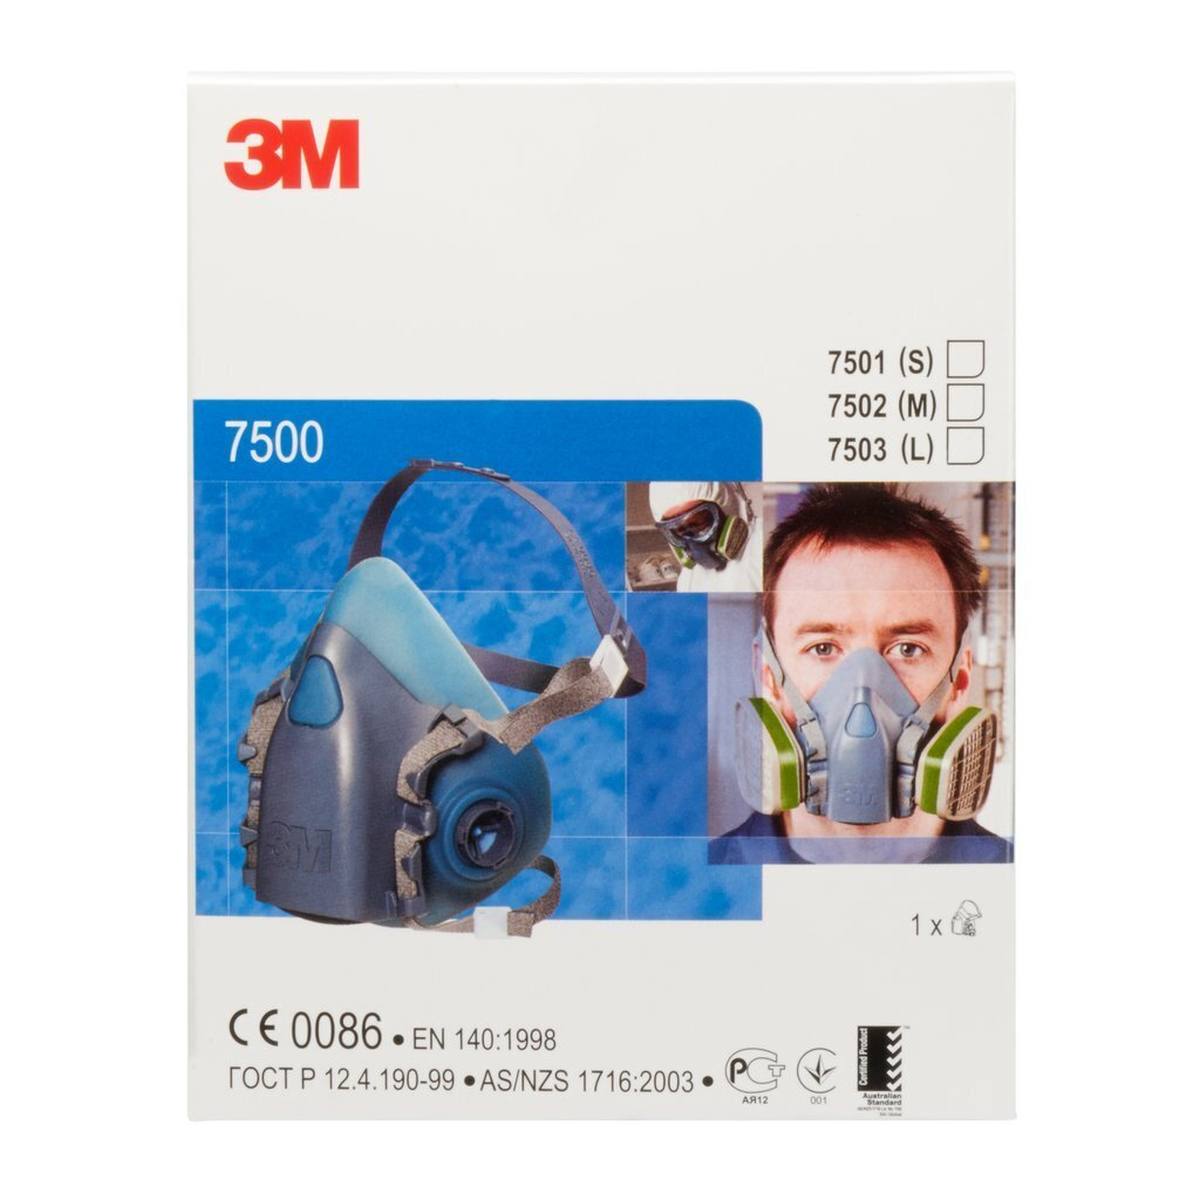 3M 7503L Half mask body silicone / thermoplastic polyester size L